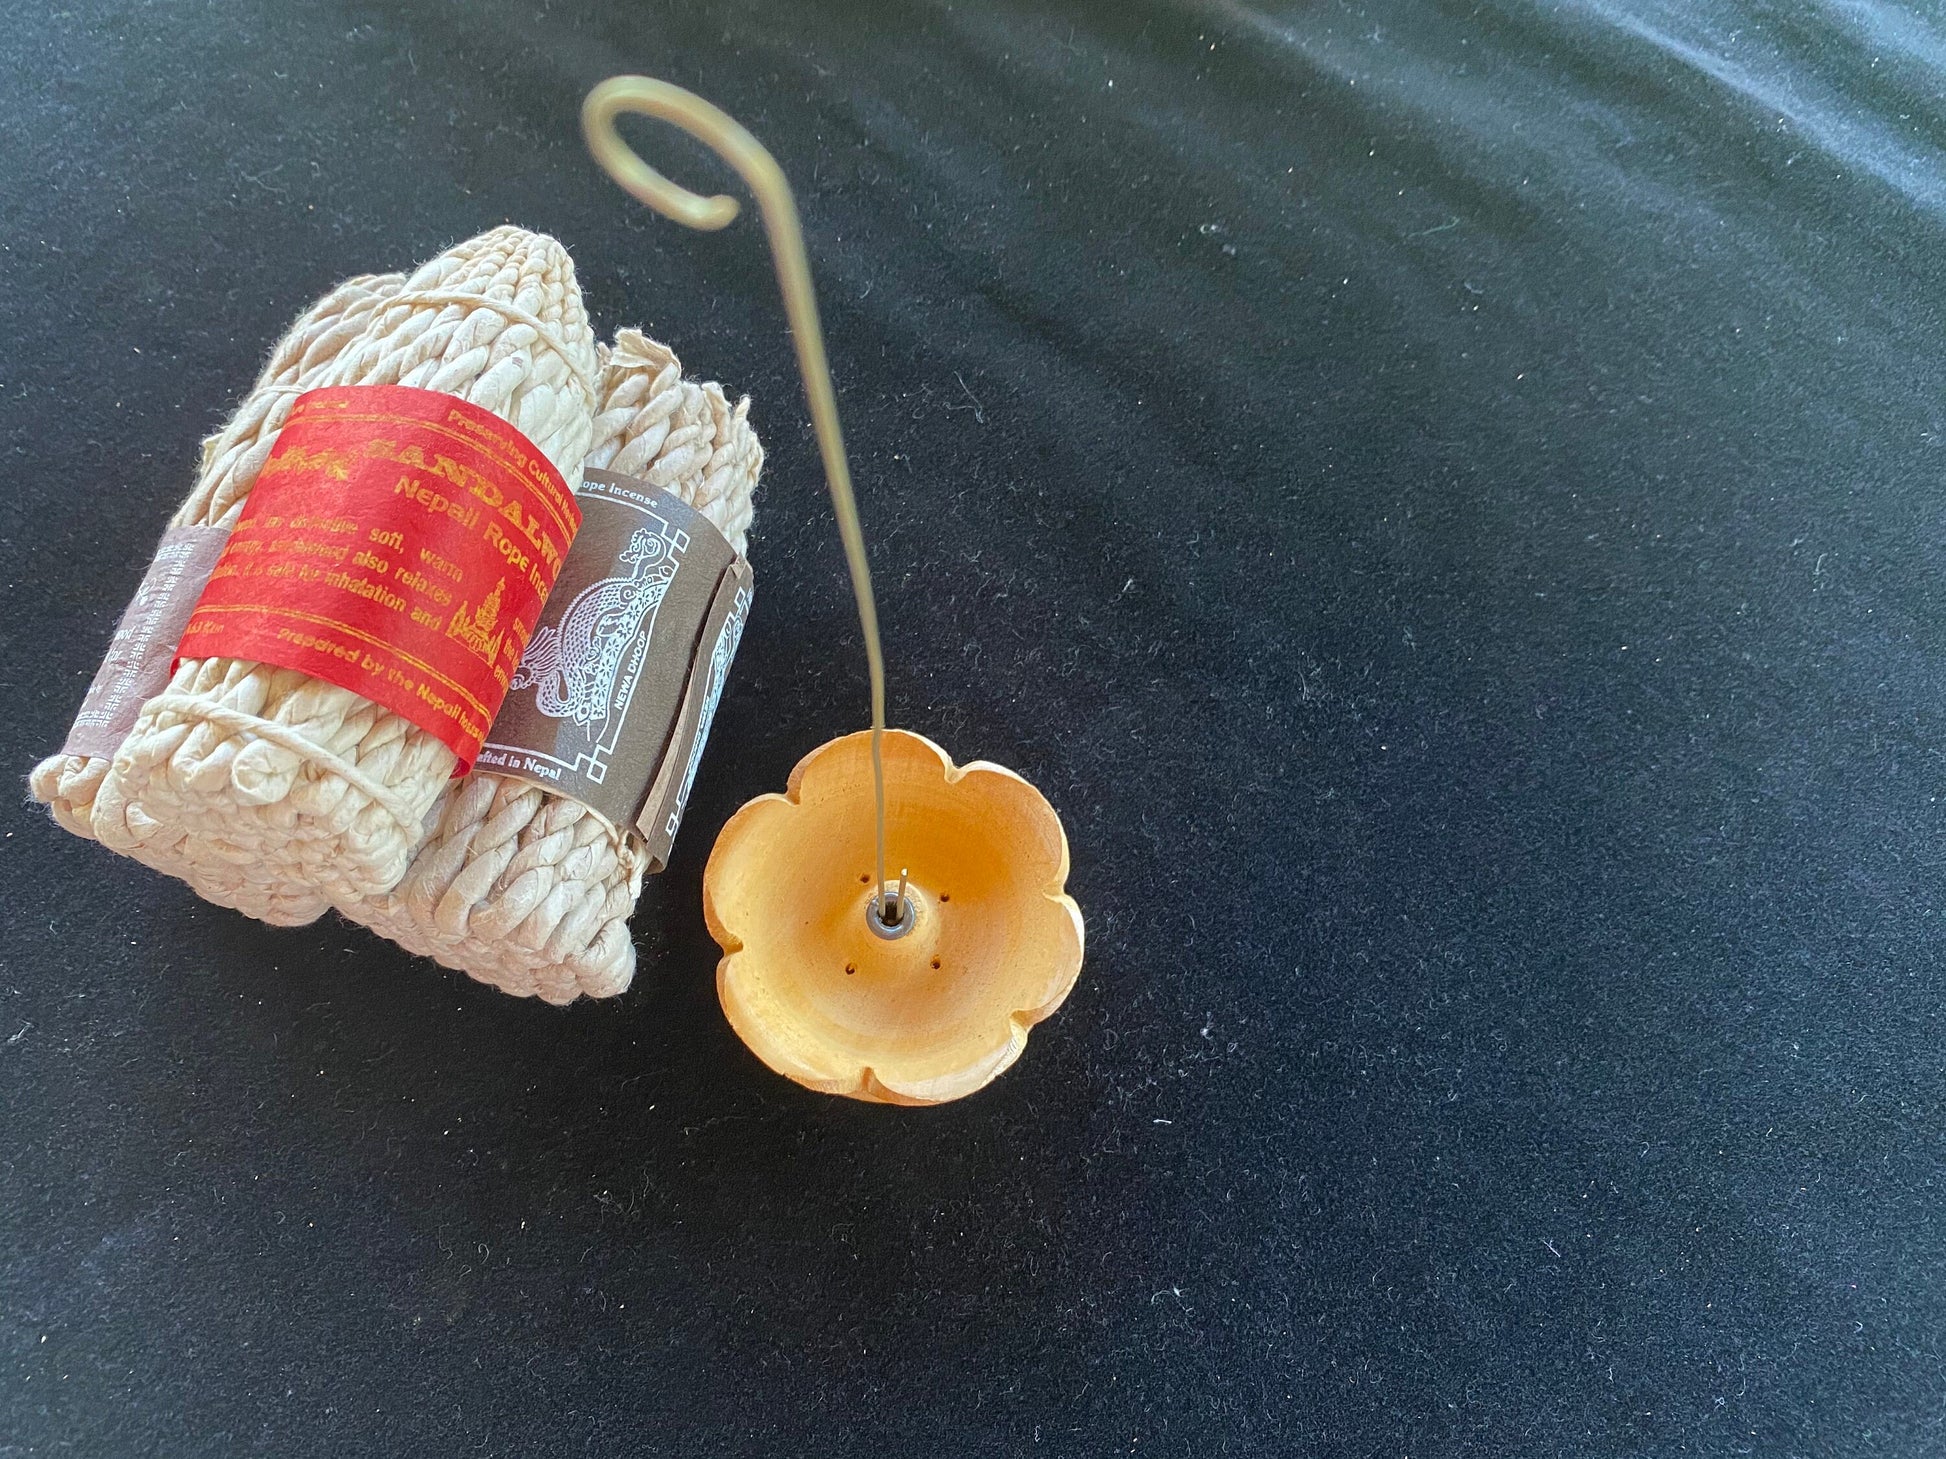 Handmade Rope Incense Holder | Assorted Styles | 1 wooden holder with metal hook | Incense Not Included